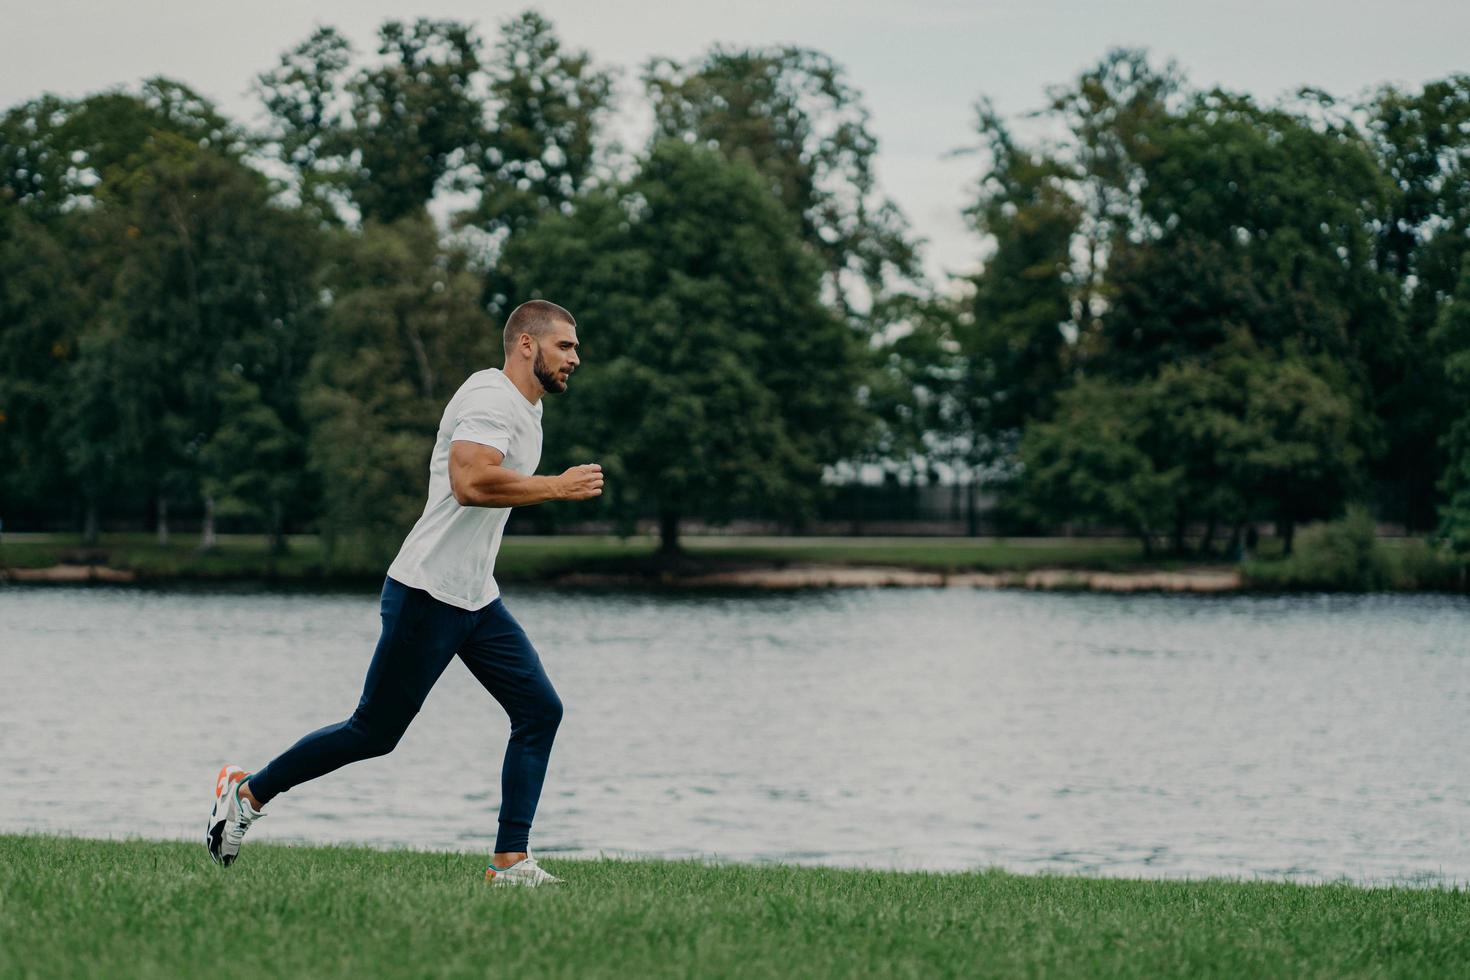 Handsome athlete bearded man runs outdoors in morning poses near river enjoys nature and fresh air, demonstrates endurance and motivation, has morning workout every day, stays fit healthy strong photo